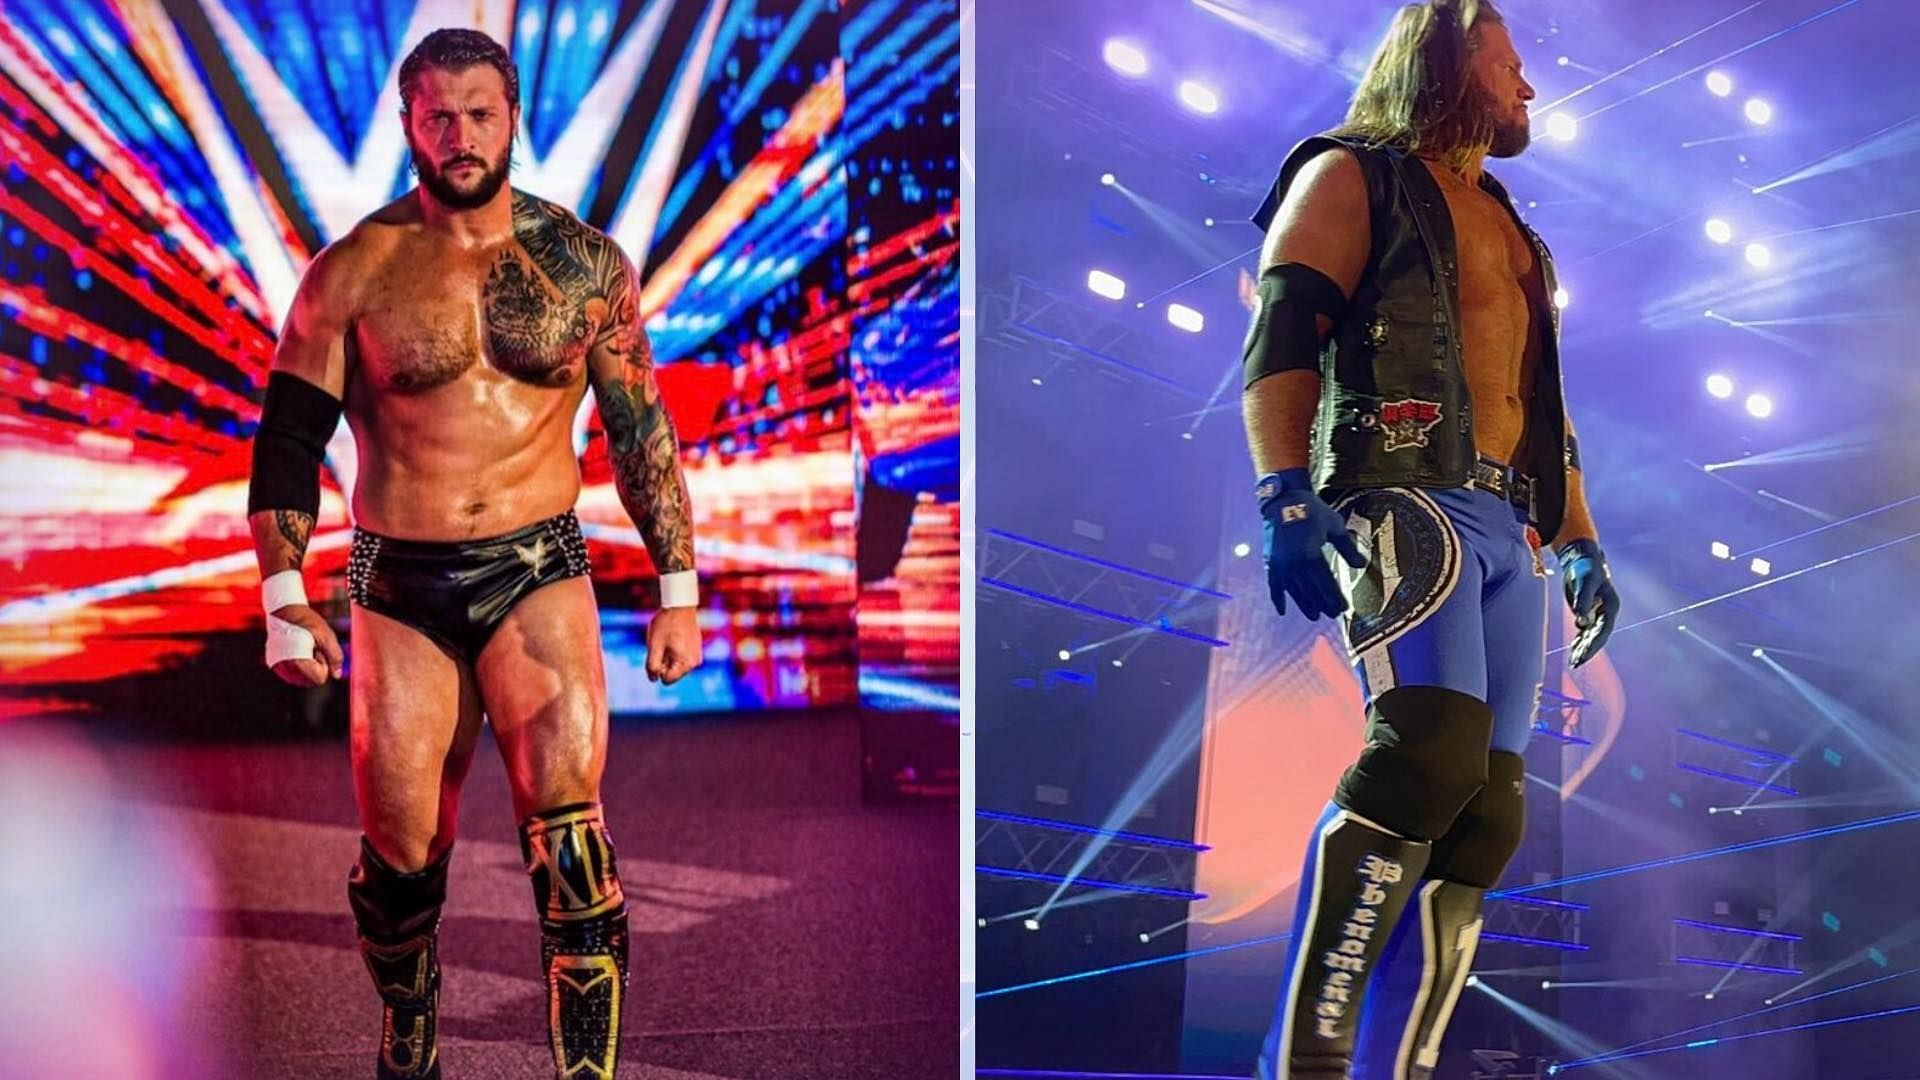 Karrion Kross and AJ Styles will clash on WWE SmackDown